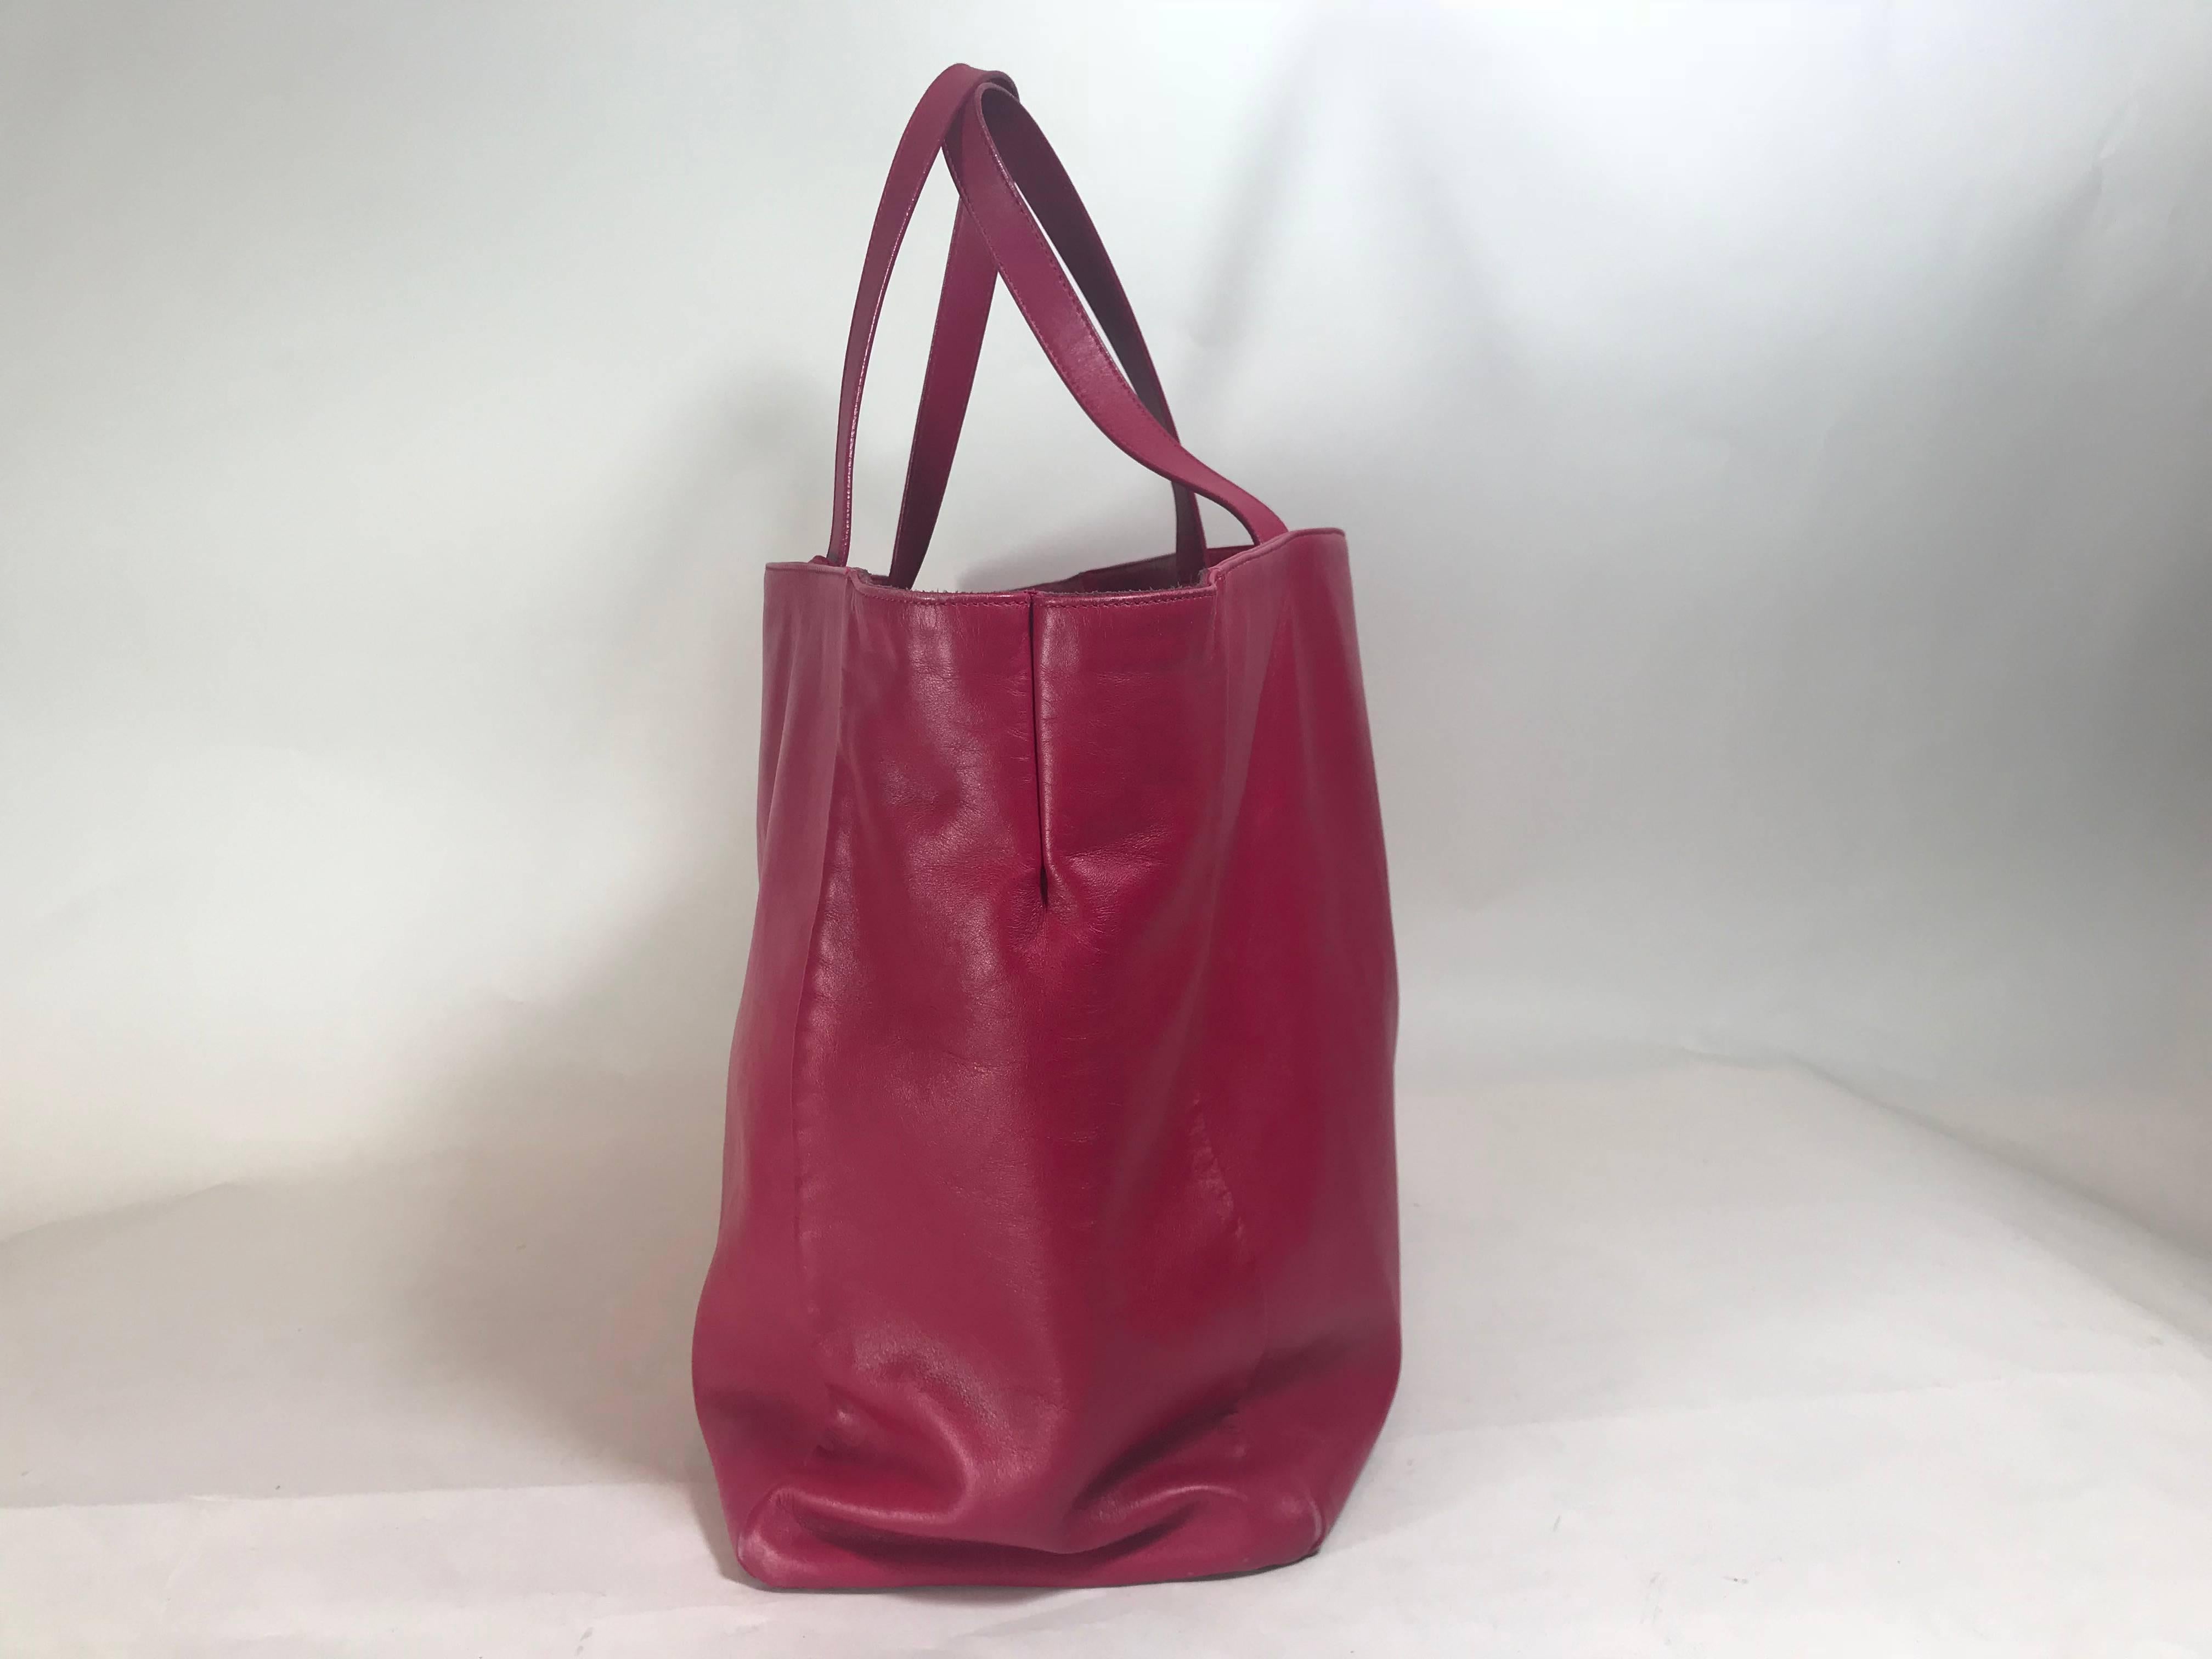  Saint Laurent Leather/Suede Reversible Shopper Tote In Excellent Condition For Sale In Roslyn, NY